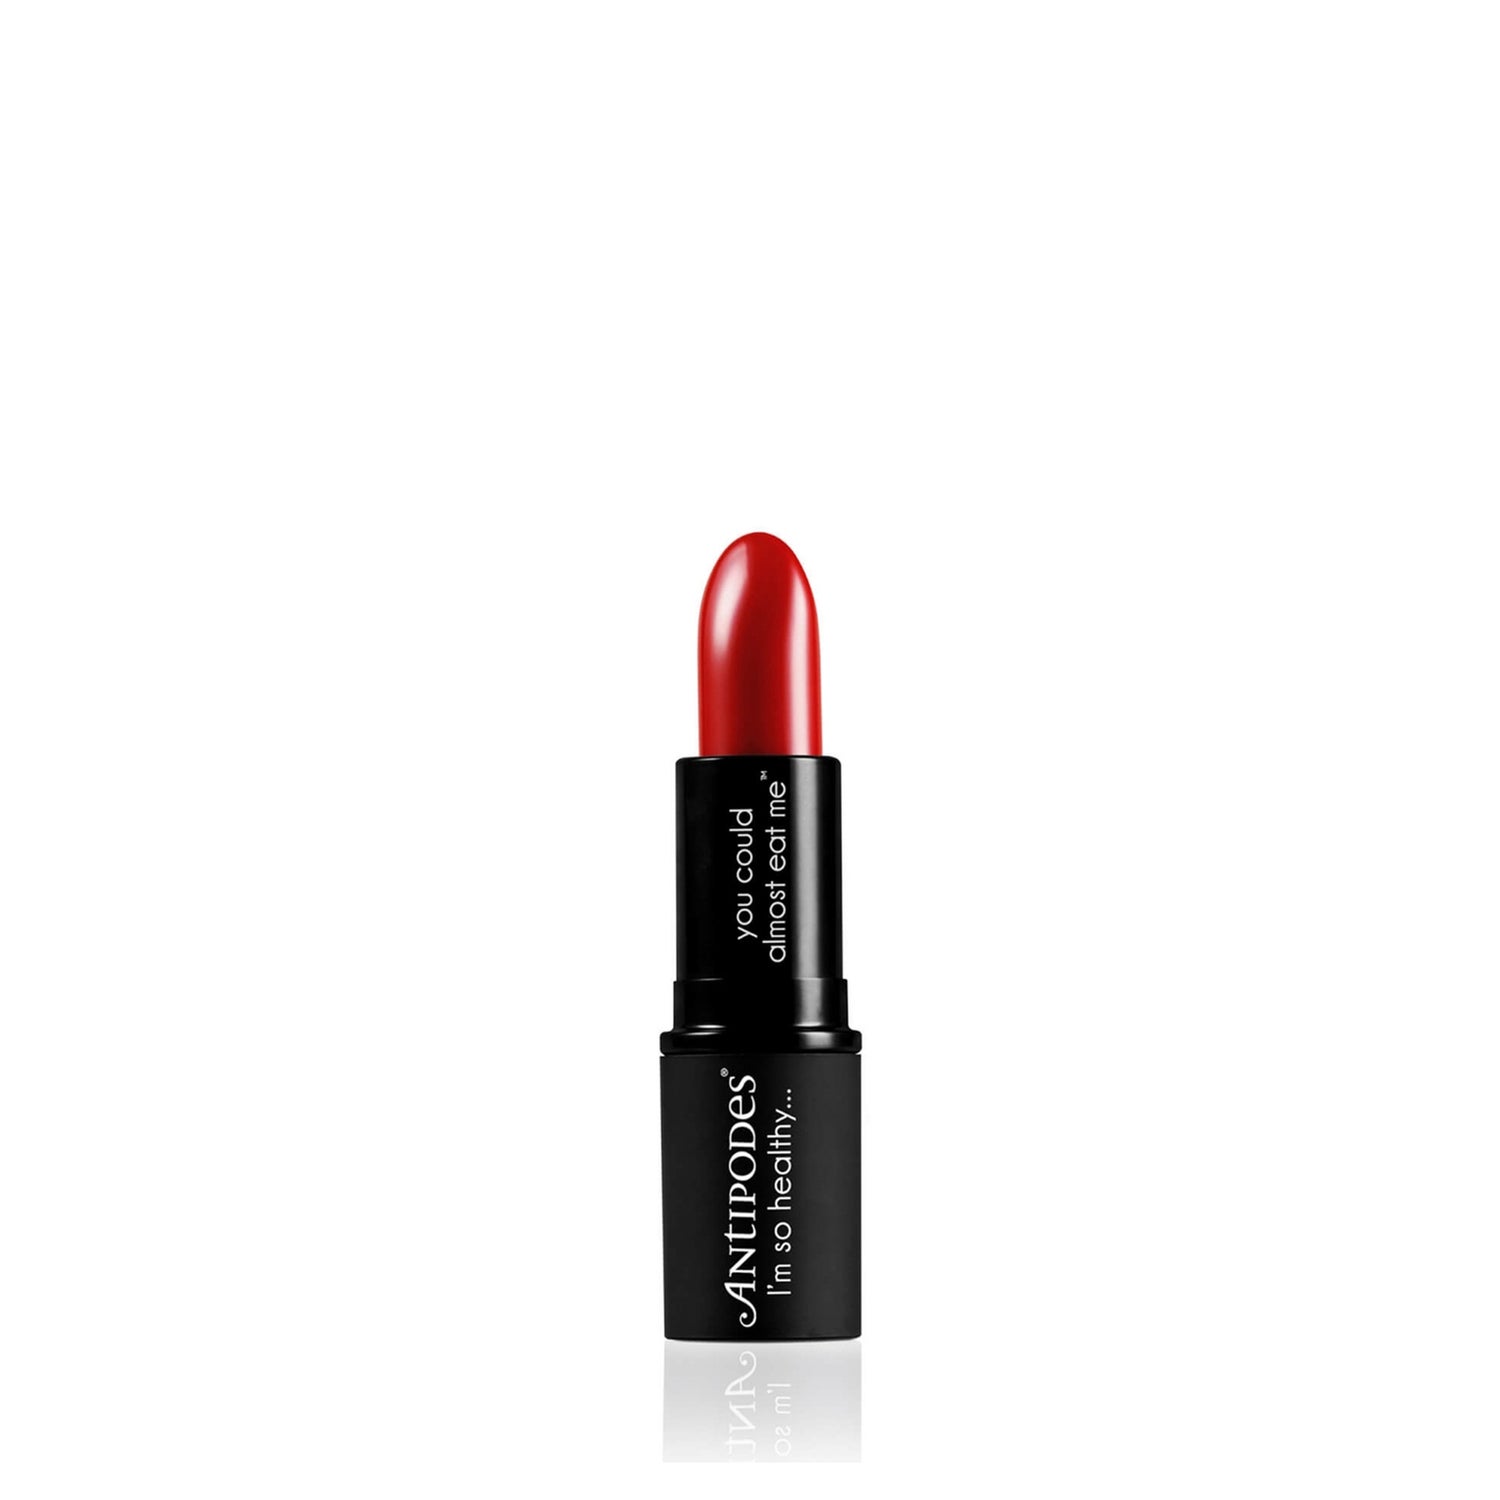 Antipodes Lipstick 4g - Ruby Bay Rouge